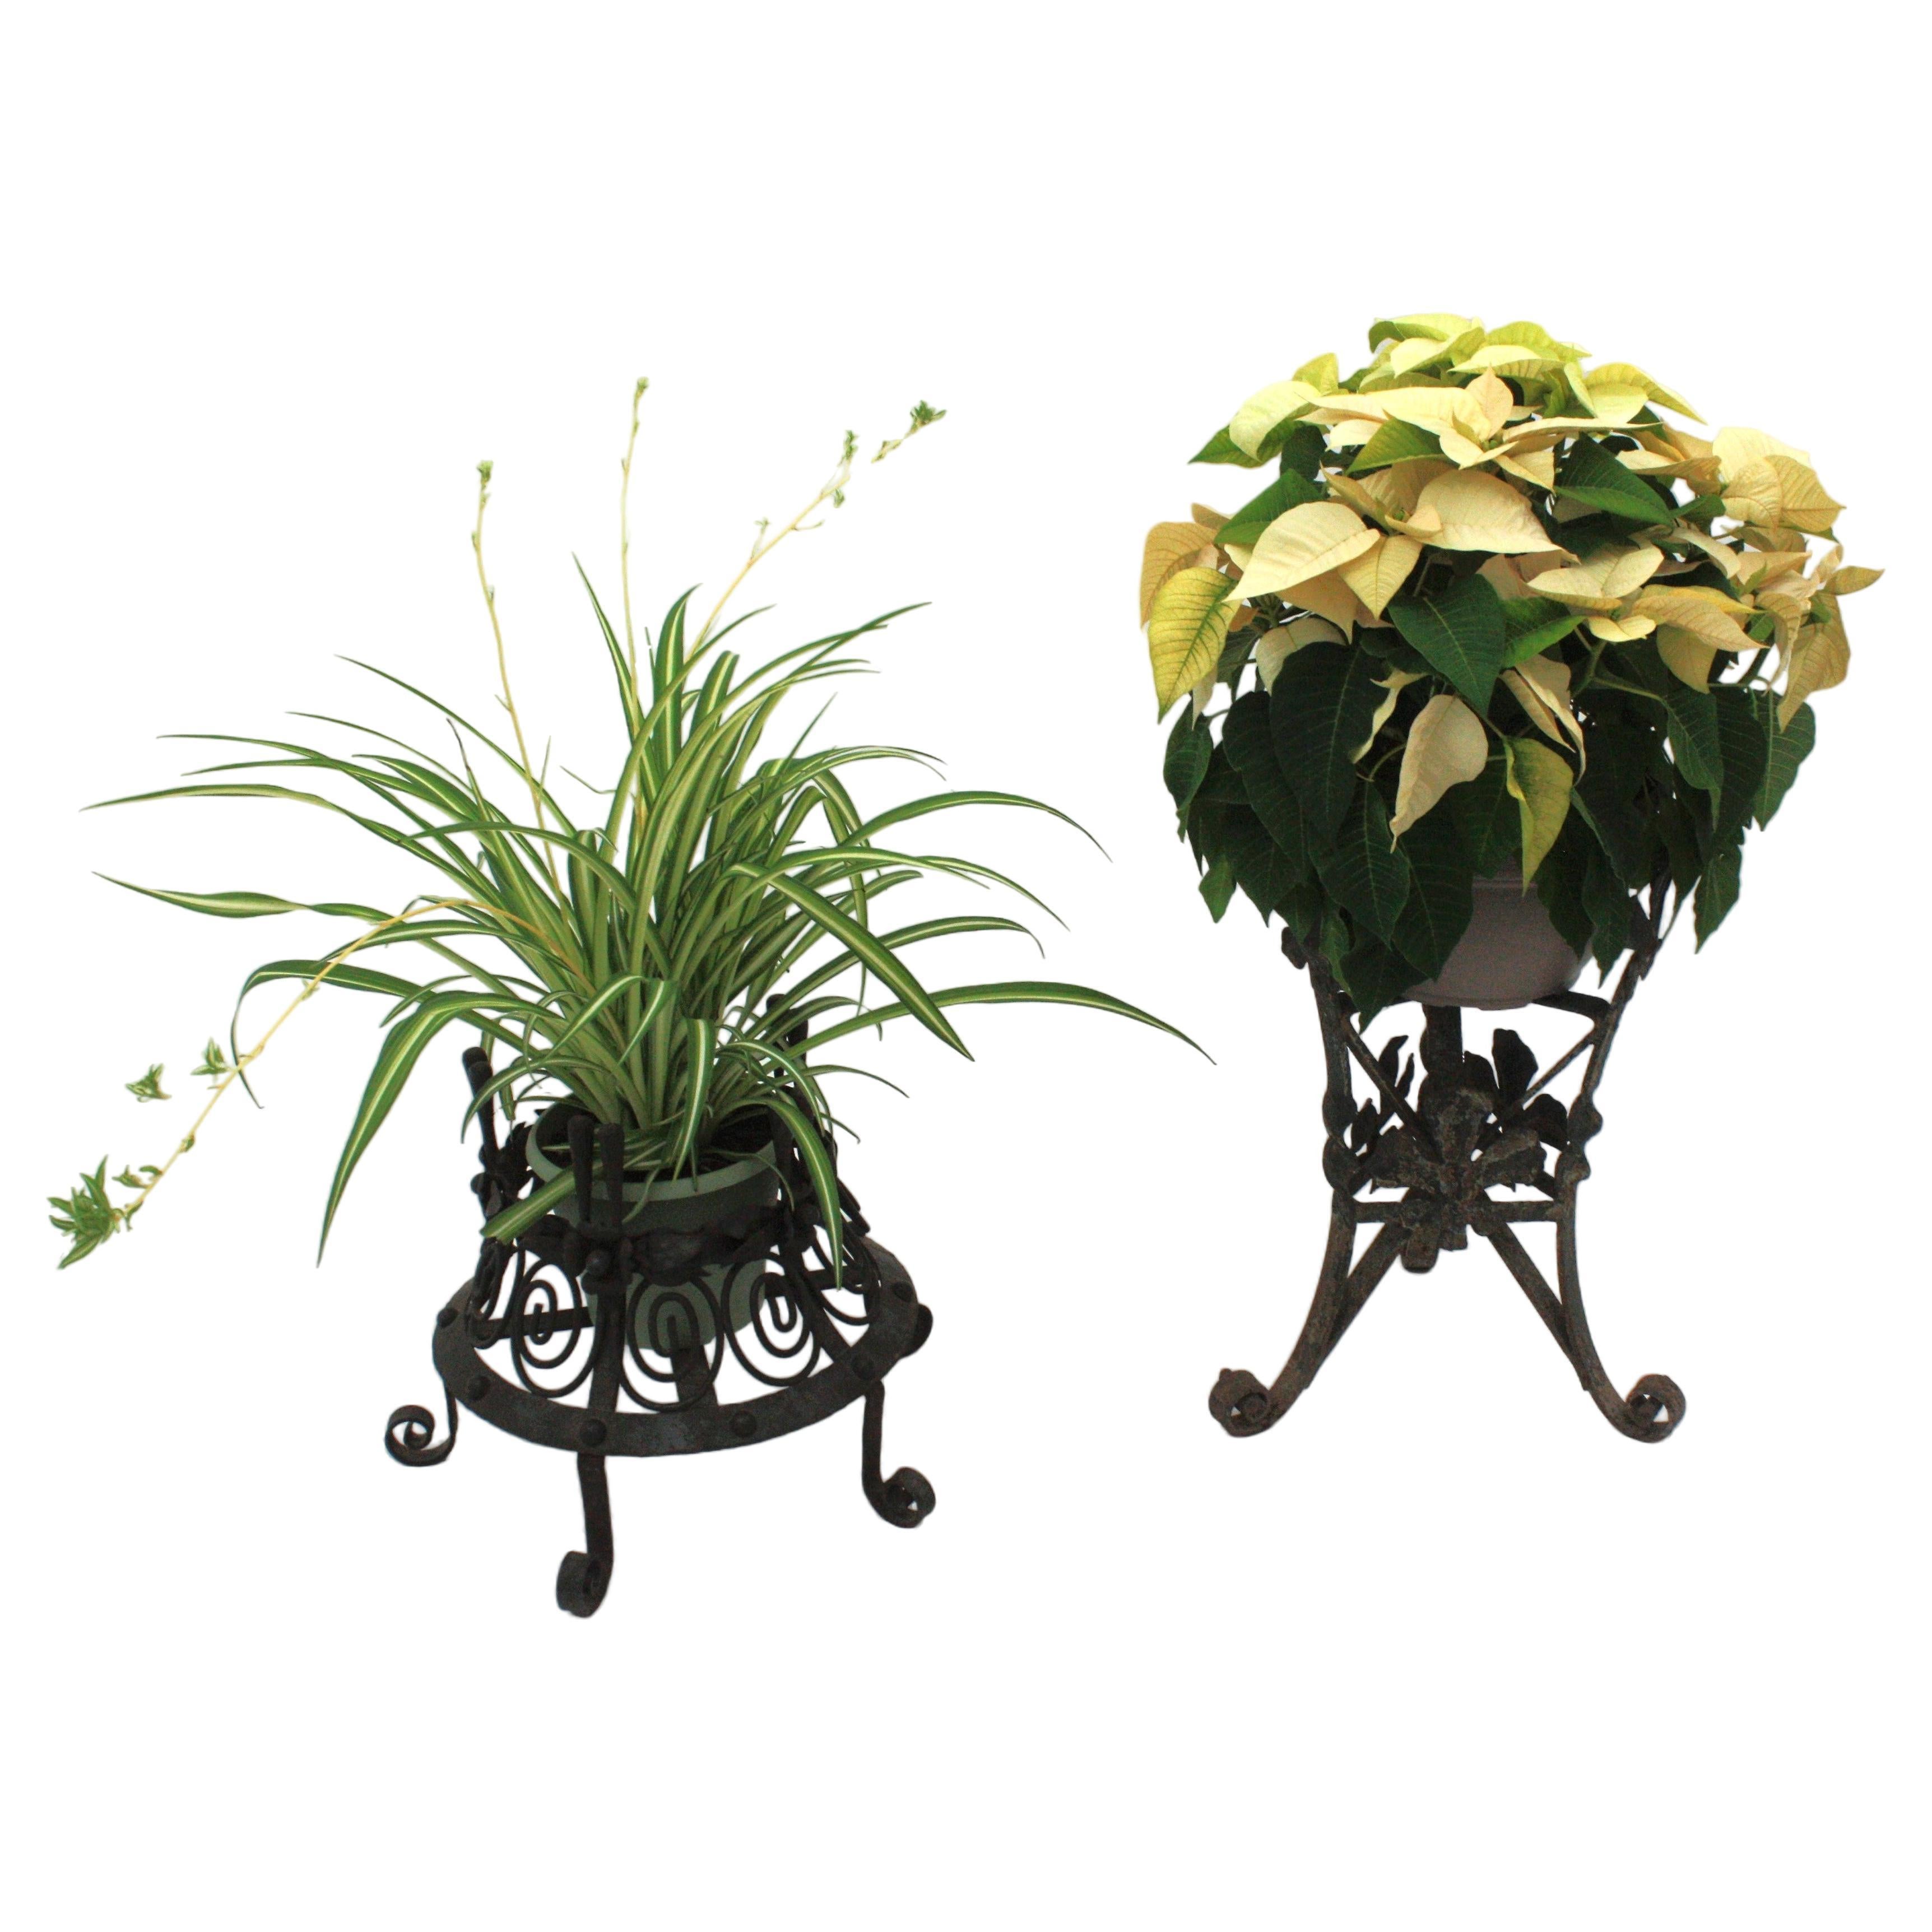 Unmatching pair of Planters / plant stands in hand forged iron, Spain 1930s-1940s.
On sale as a set.
The taller one is an Art Nouveau style Tripod plant stand in wrought iron with foliage and floral motifs. Spain, 1930s.
Handcrafted in hand forged